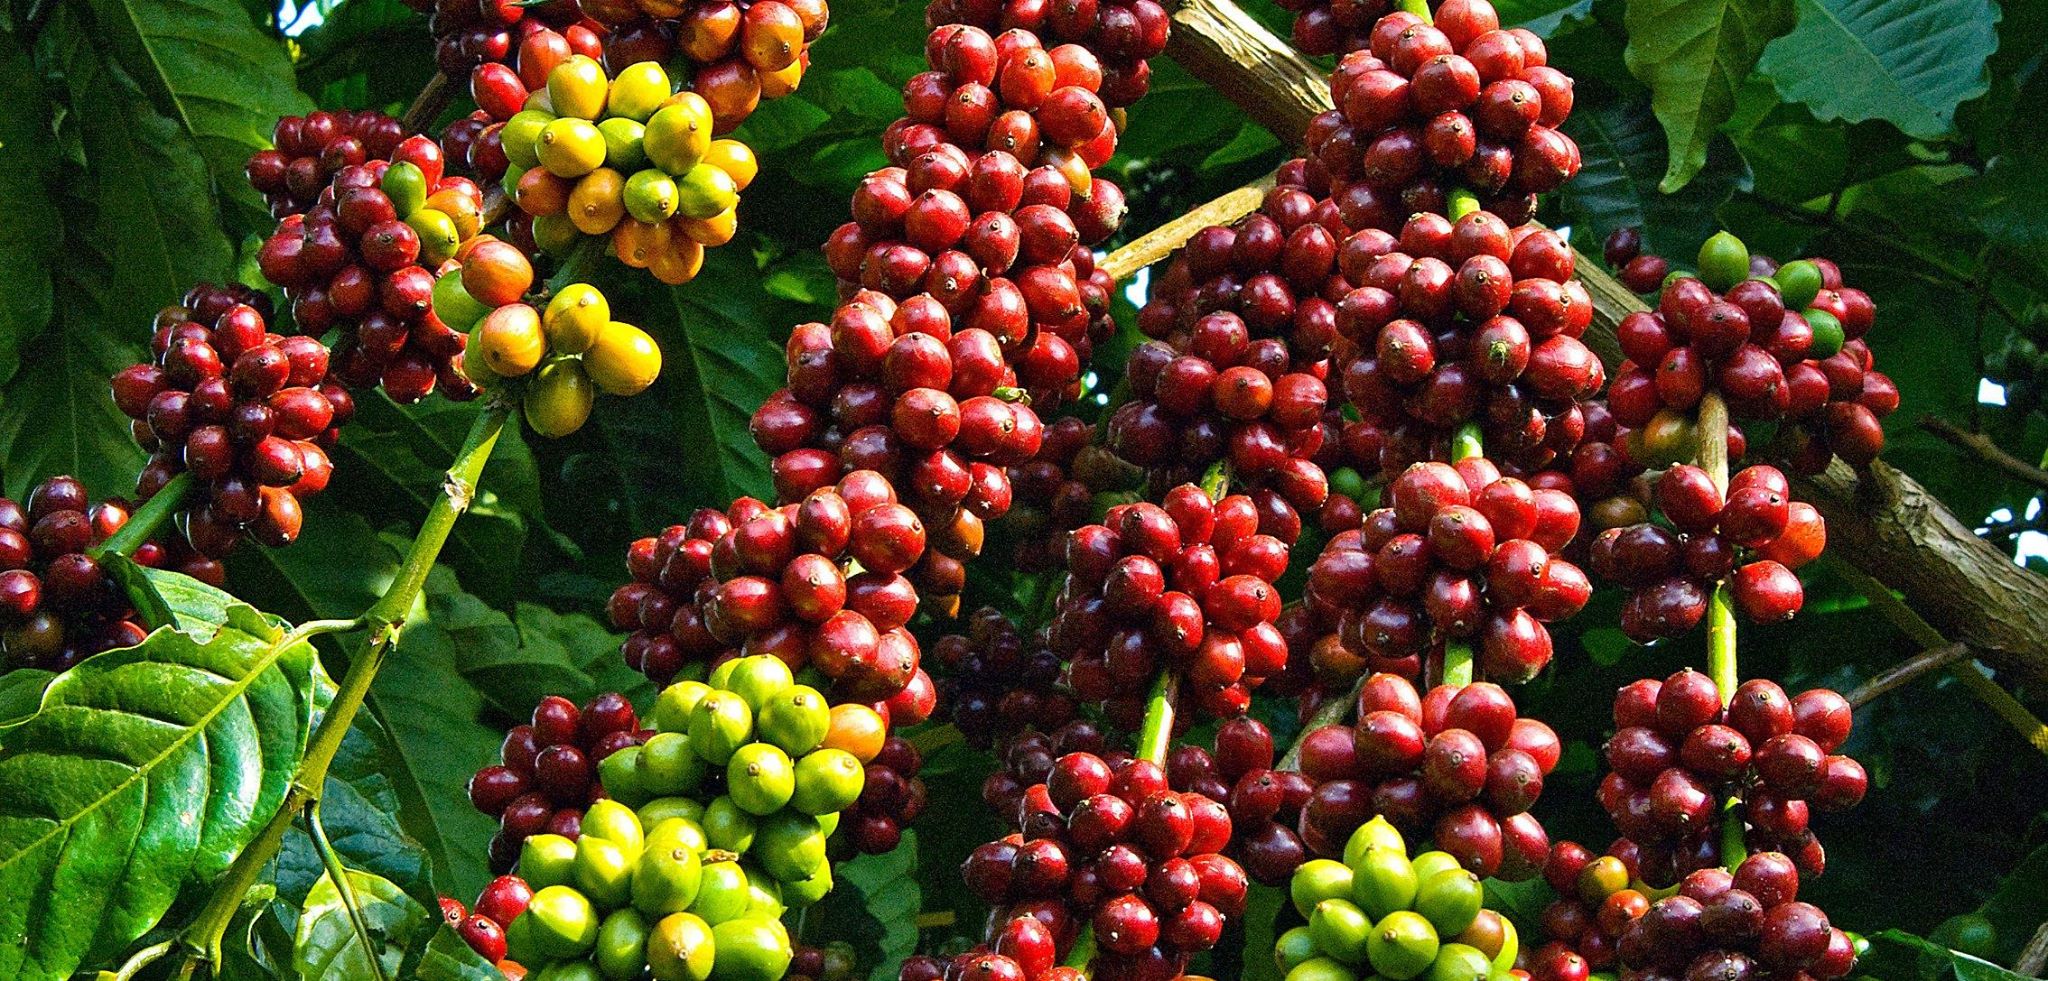 Overview of ASEAN coffee industry